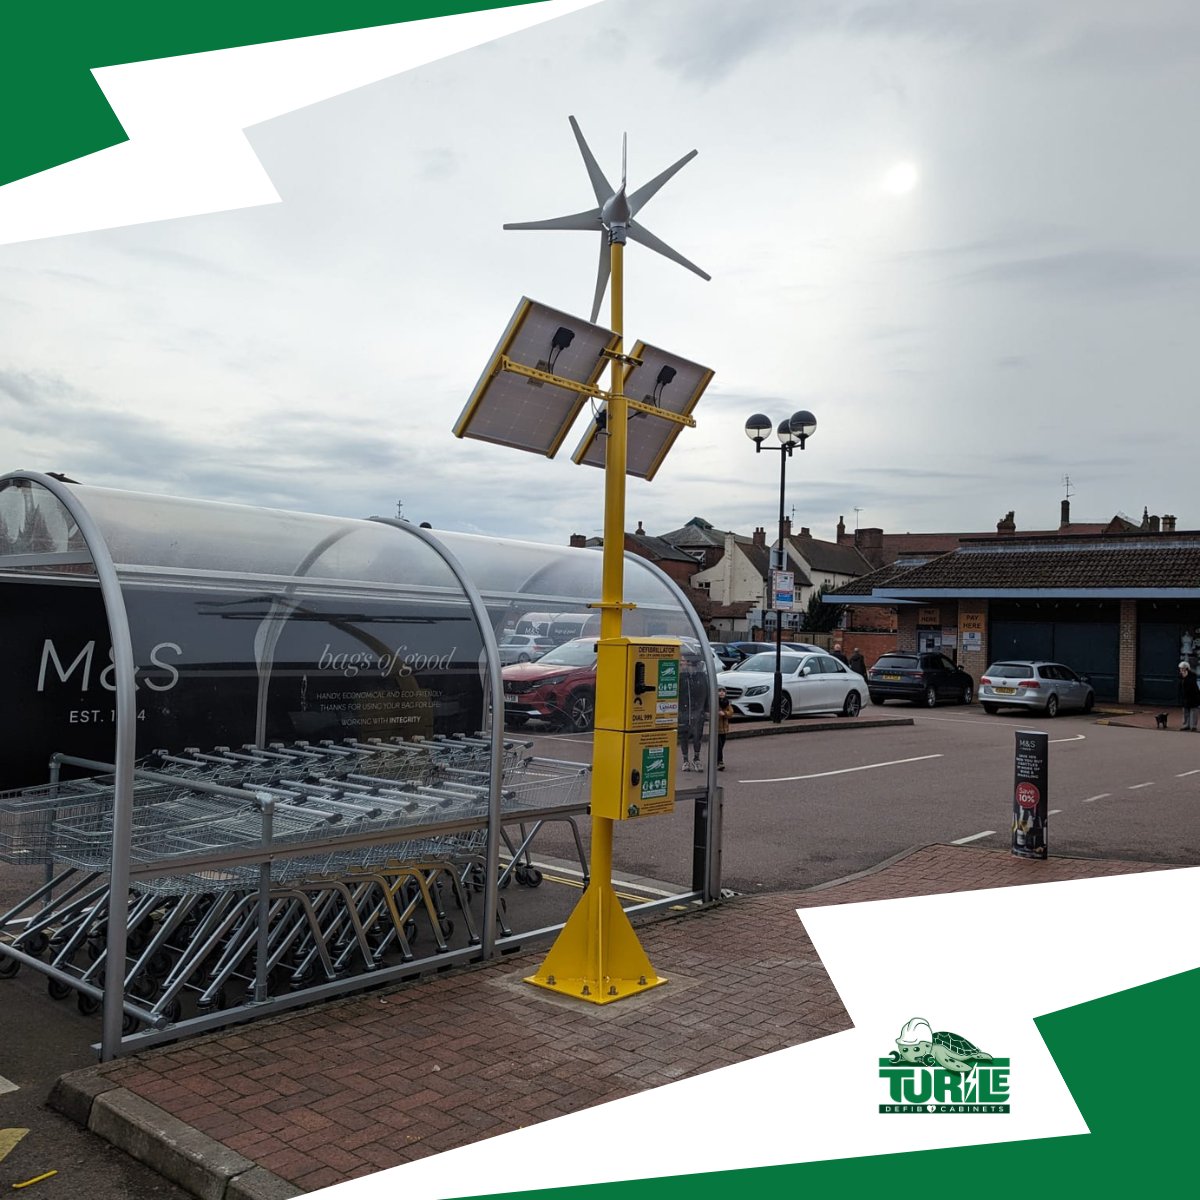 This isn’t just any #wind & #solar defib cabinet, this is an M&S wind & solar #defibcabinet 😃 💨🌞Our sustainable unit is perfect for a #golfcourse or #school #sportspitch …or a public car park like at @marksandspencer #Bourne #Lincolnshire. #PublicDefib #AED #ESG